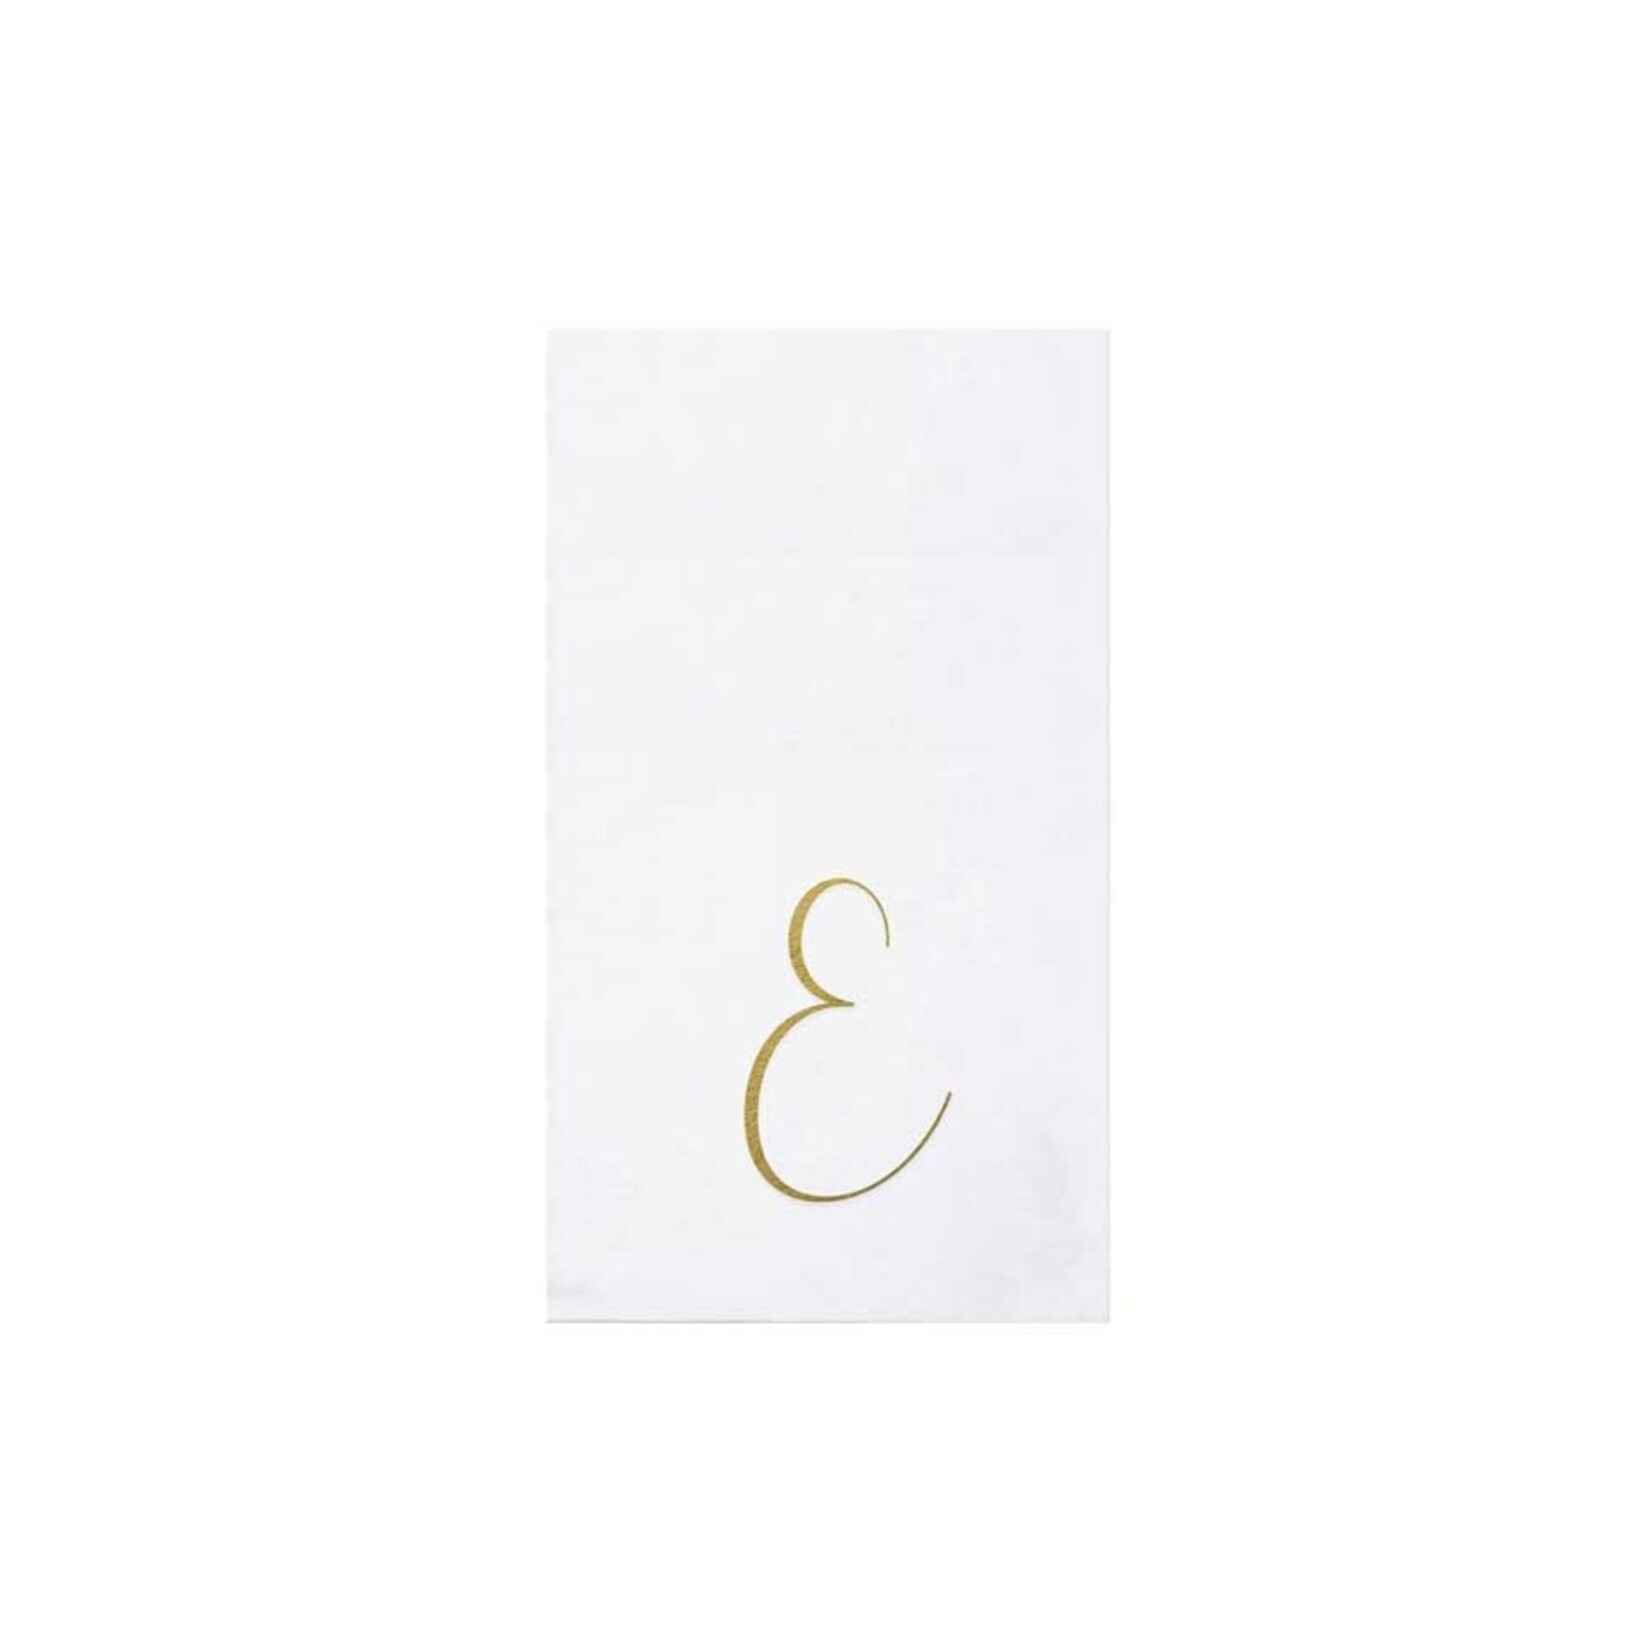 VIETRI Papersoft Napkins Gold Monogram Guest Towels - E (Pack of 20)